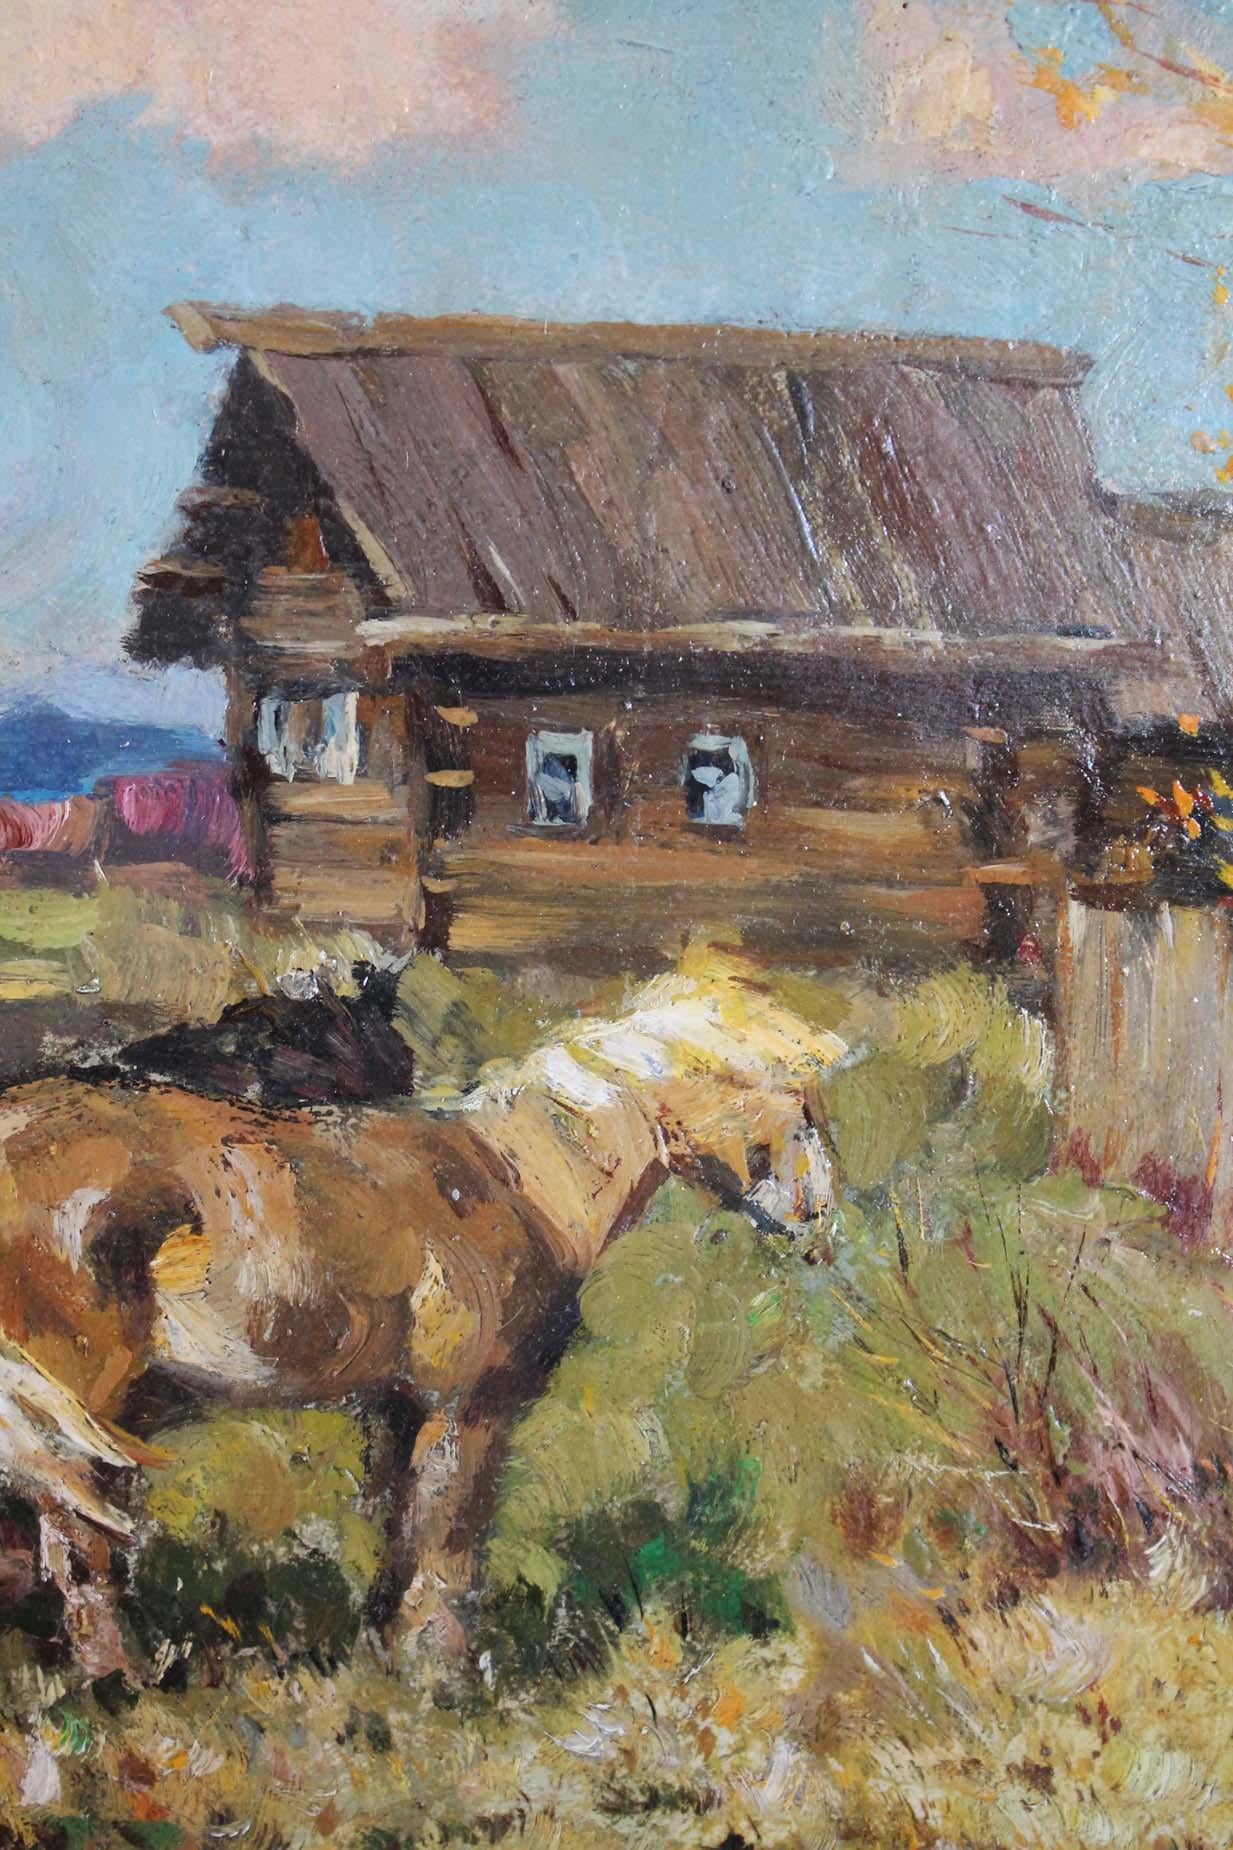 Village Landscape with Horses - Impressionist Painting by Alexander Kirchanov